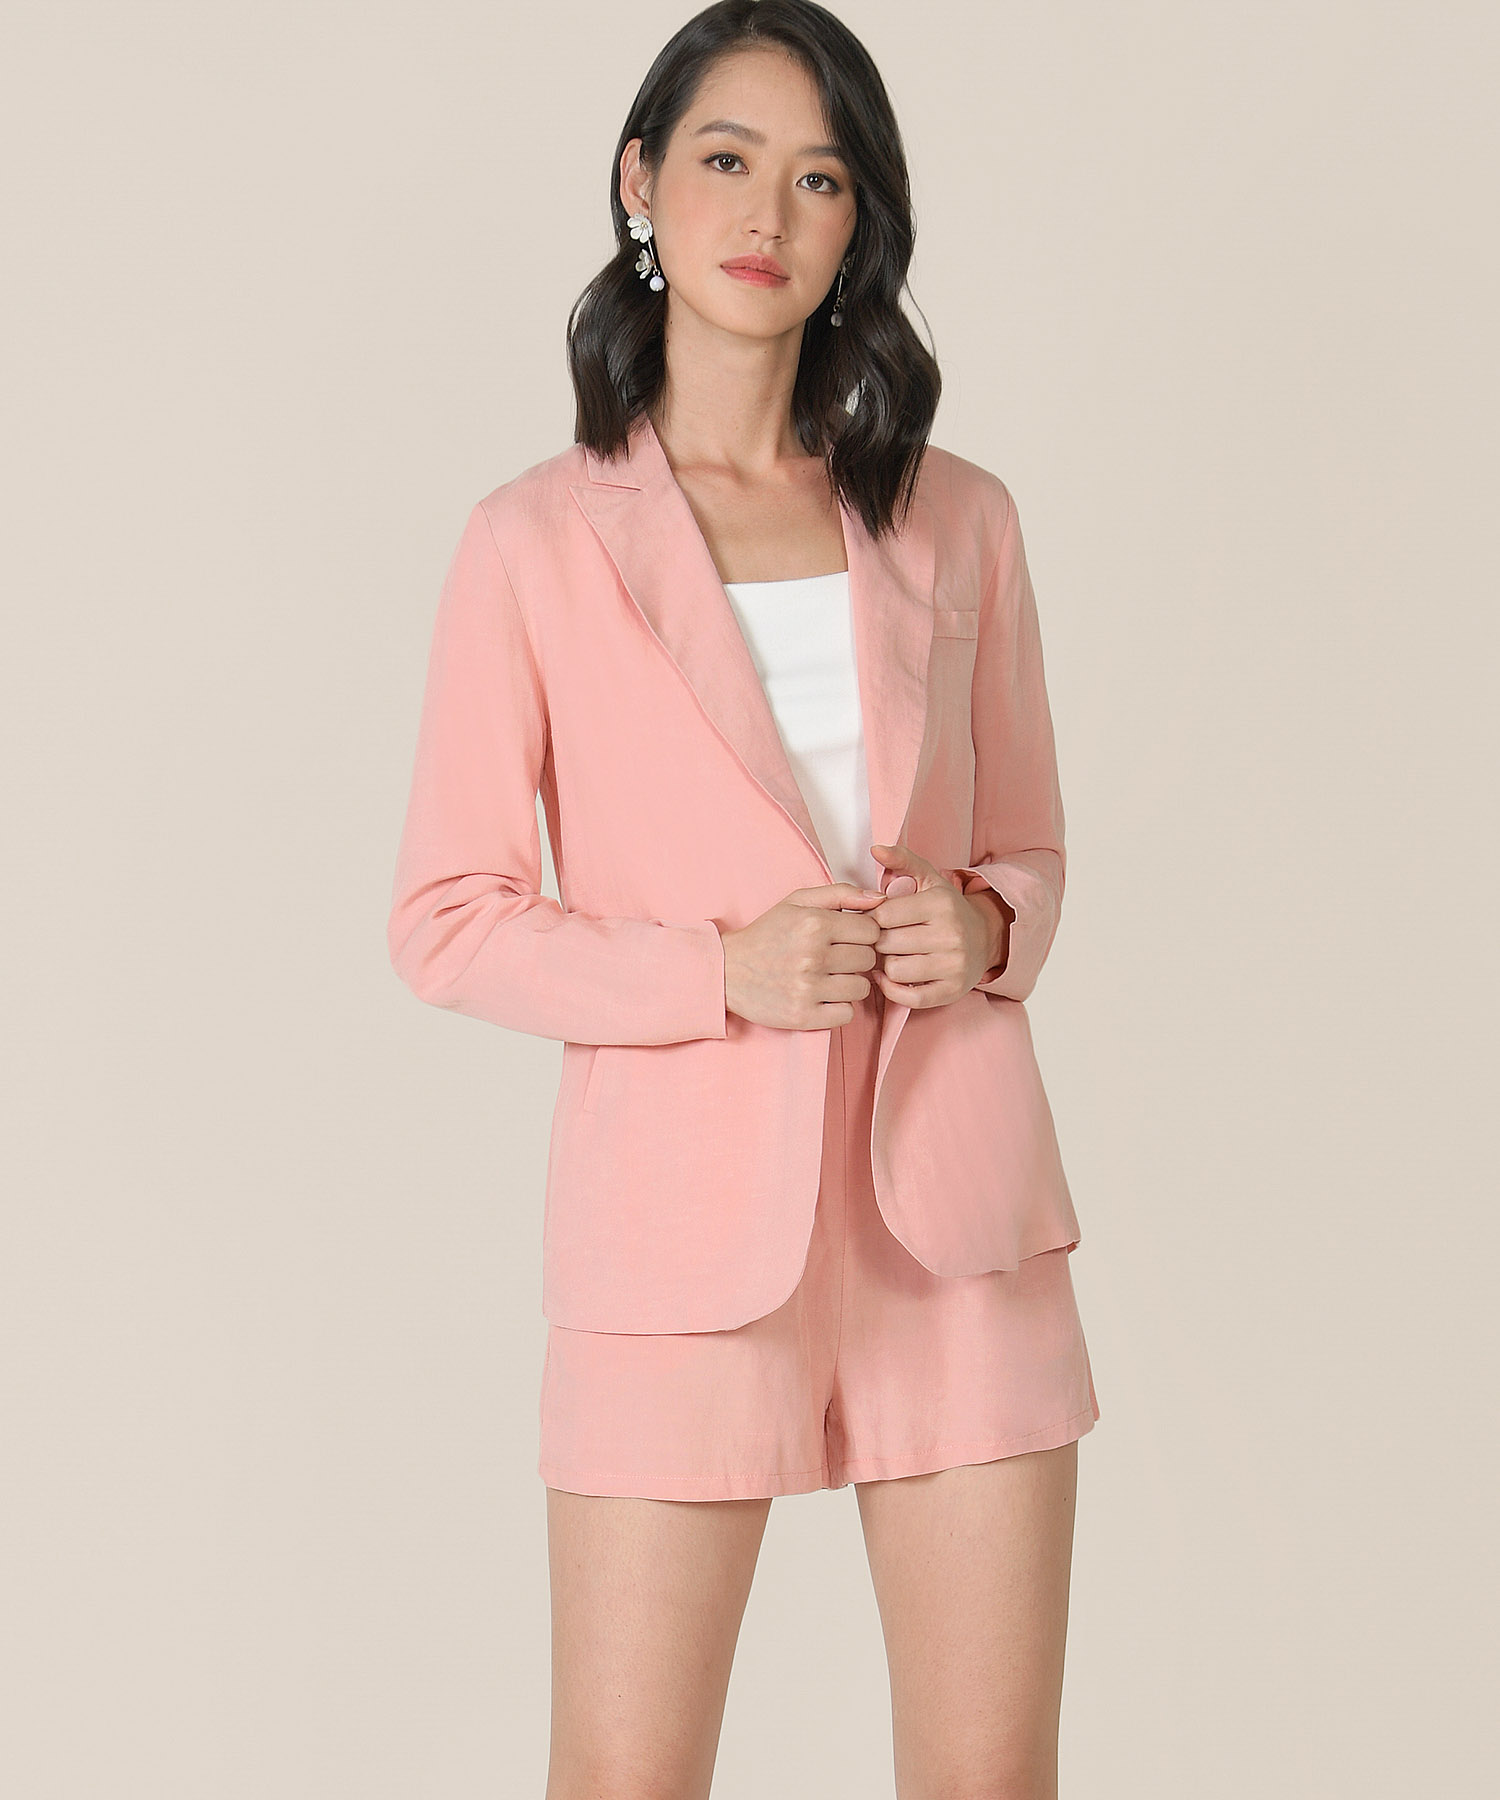 Blazer and Cardigans for Women